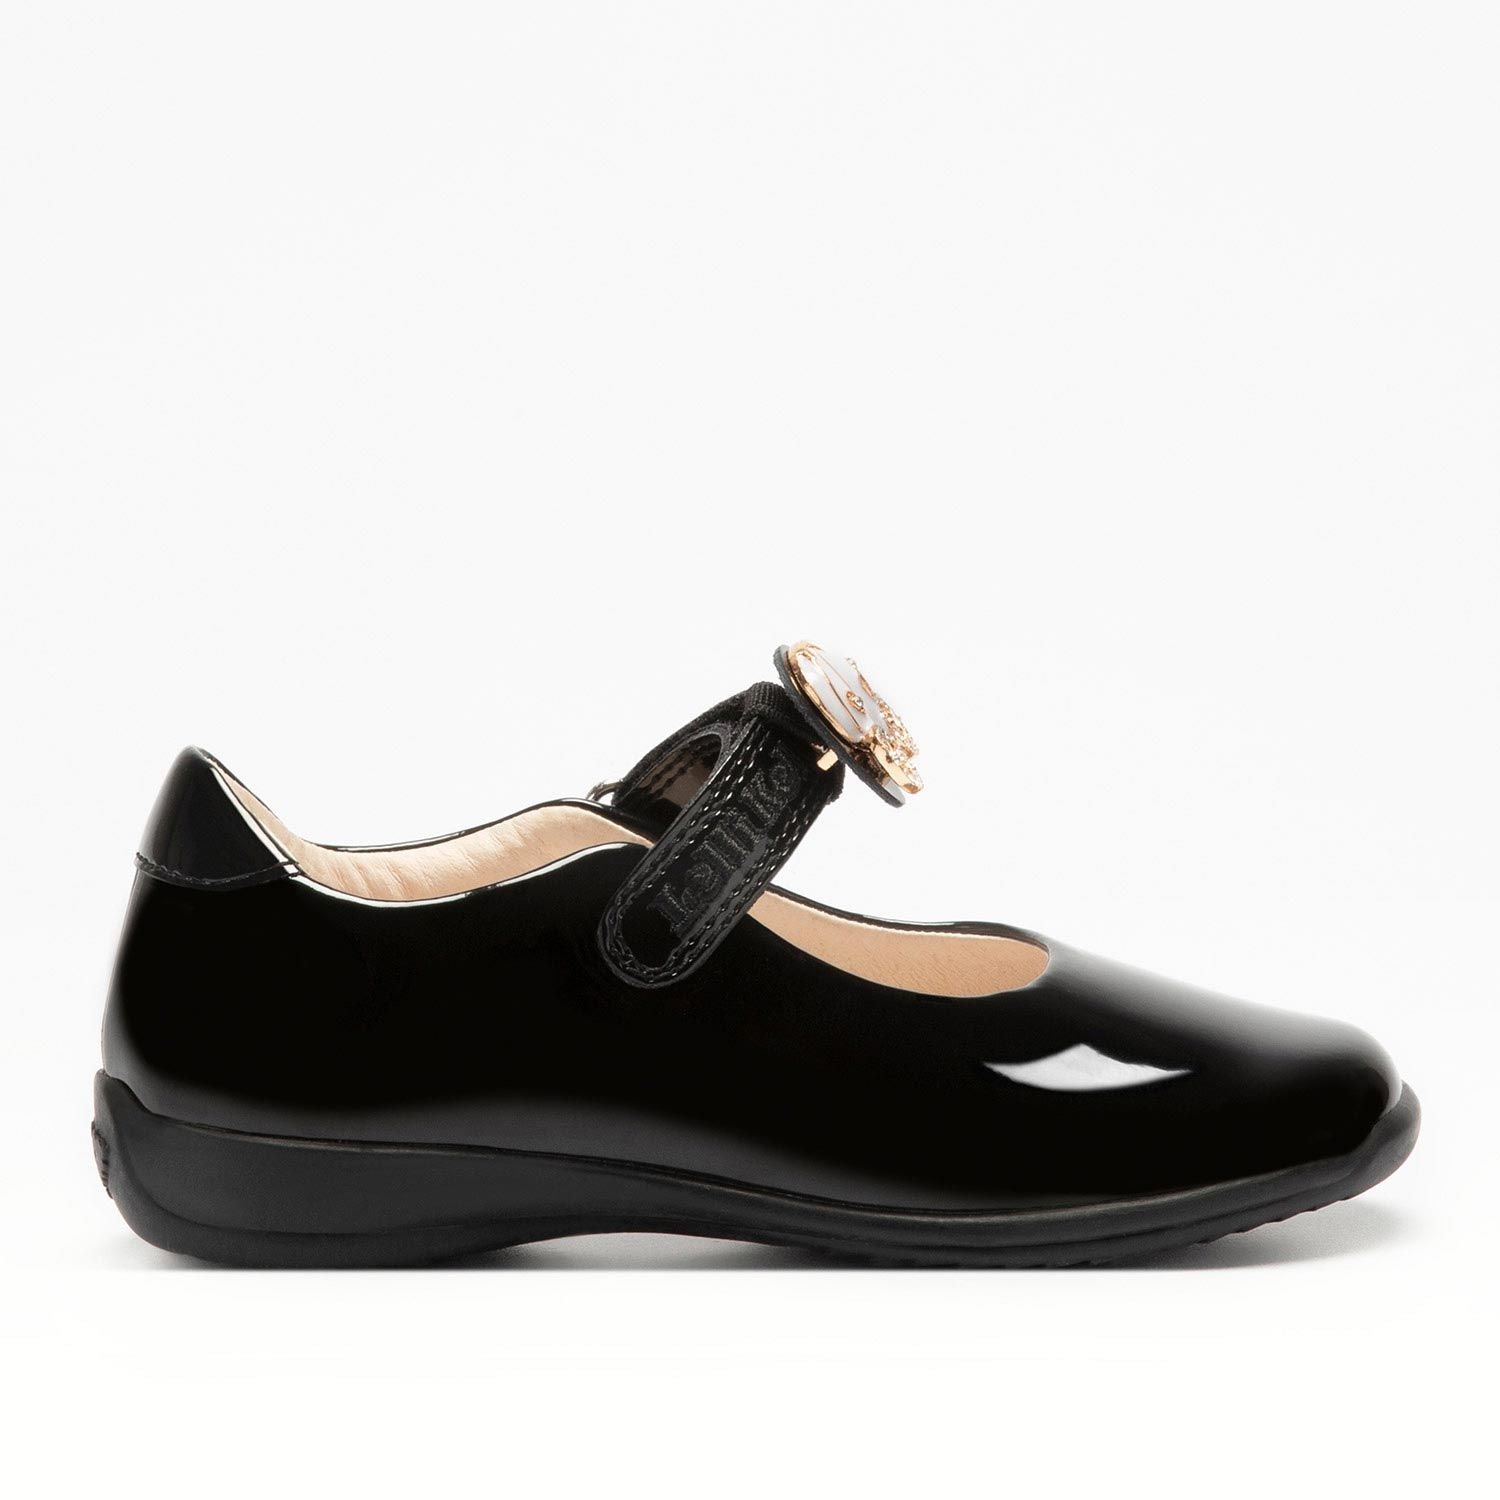 A girls Mary Jane school shoe by Lelli Kelly, style LK8119 Ella, in black patent leather with velcro fastening and detachable gold/white pumpkin carriage. Right side view.